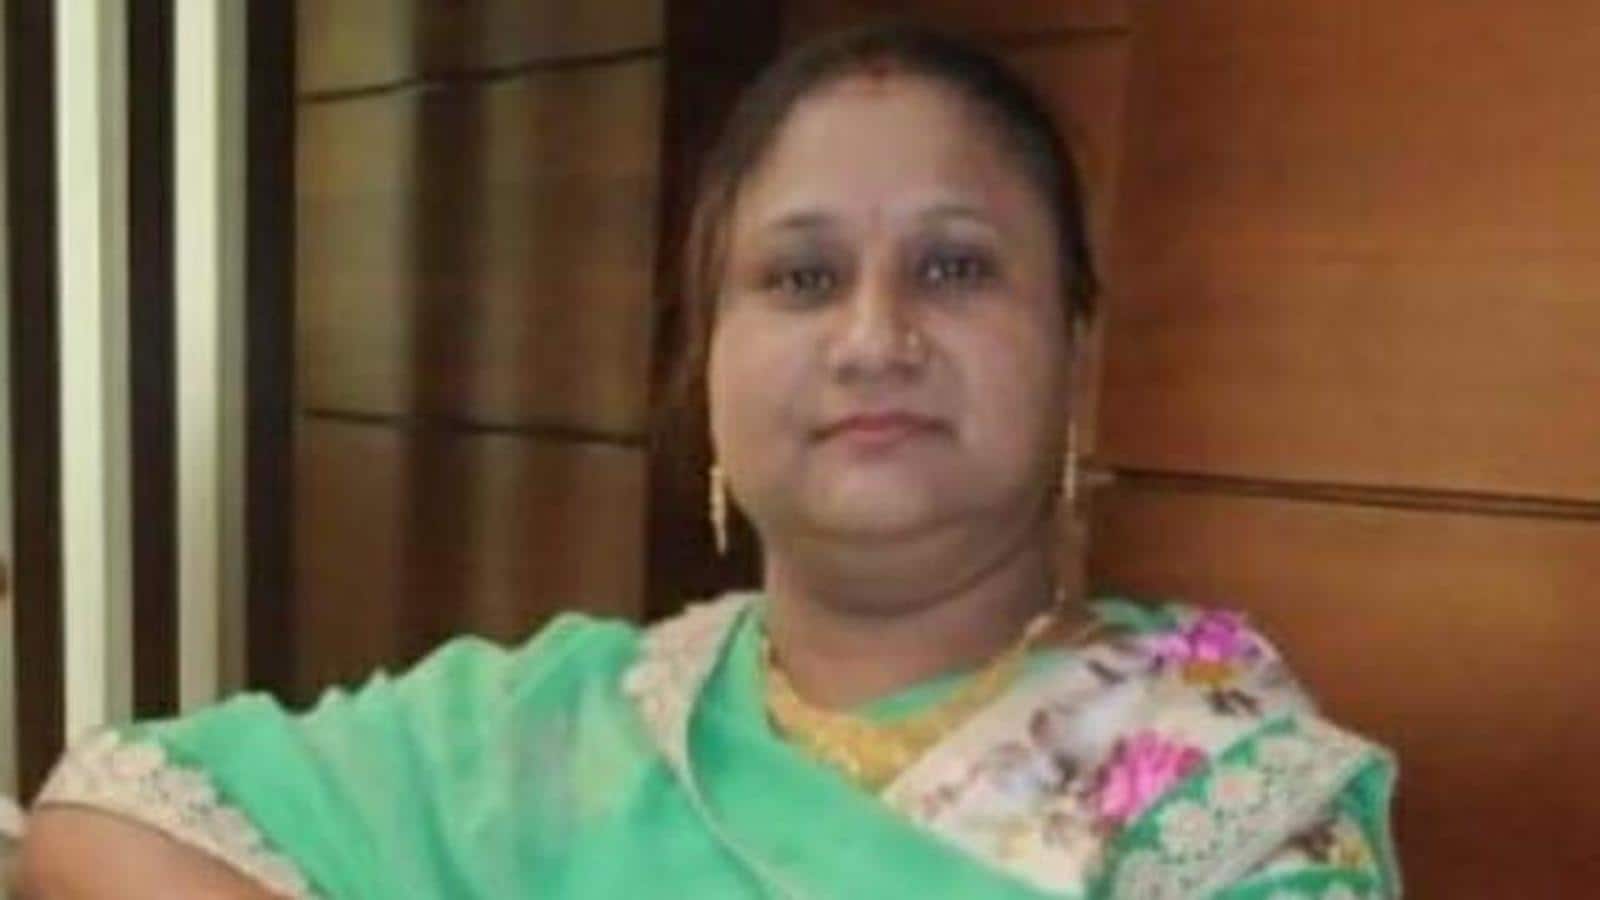 Union minister Thawar Gehlot's daughter succumbs to Covid in Indore | Hindustan Times